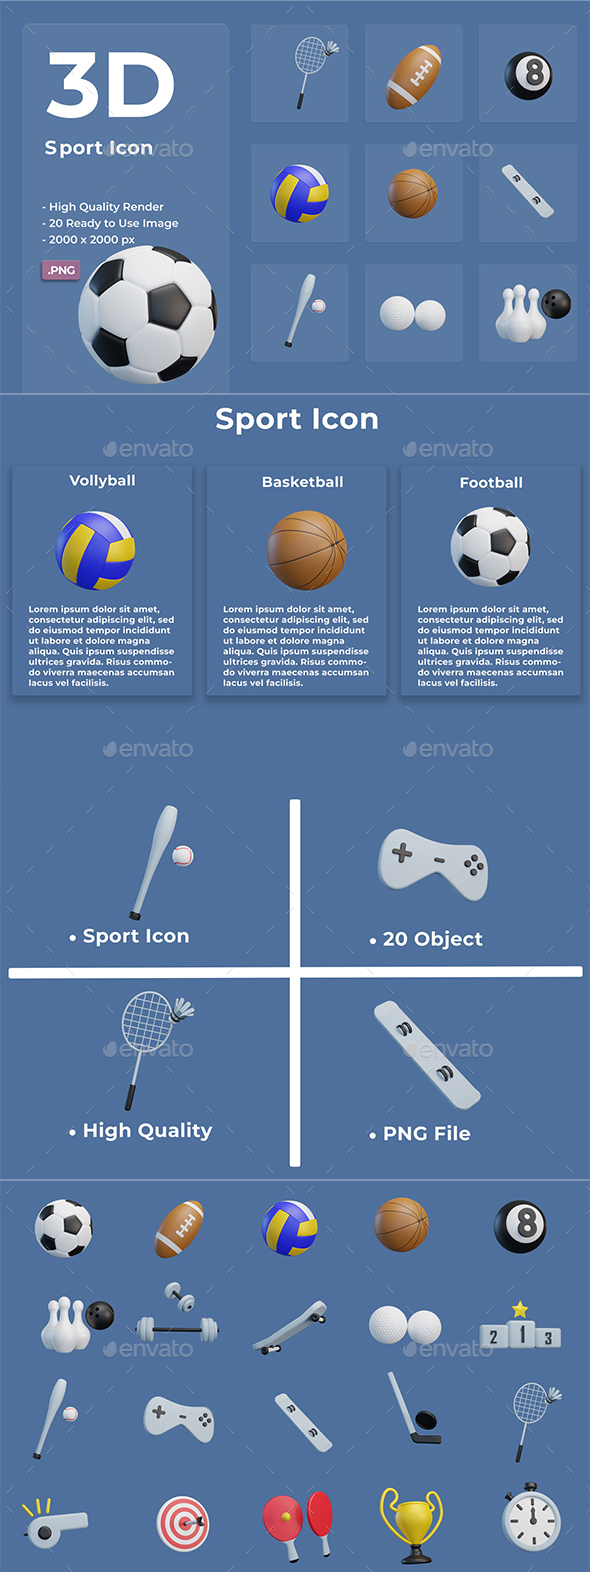 [DOWNLOAD]3D Sport Icon